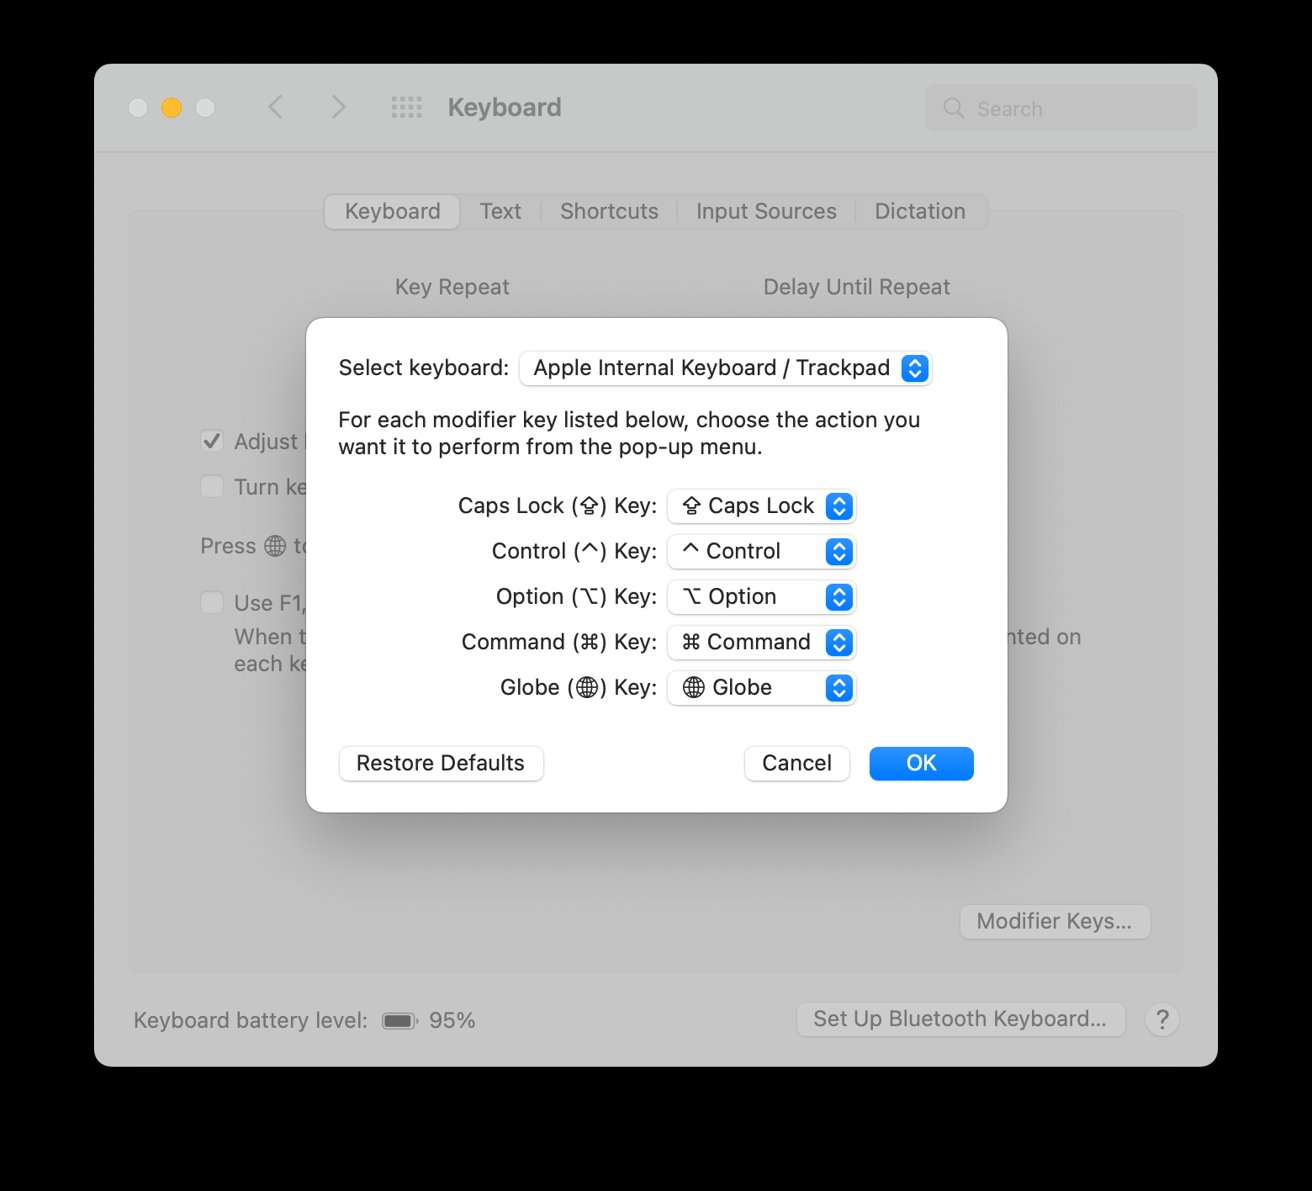 How you can remap caps lock, management, choice & command keys in macOS